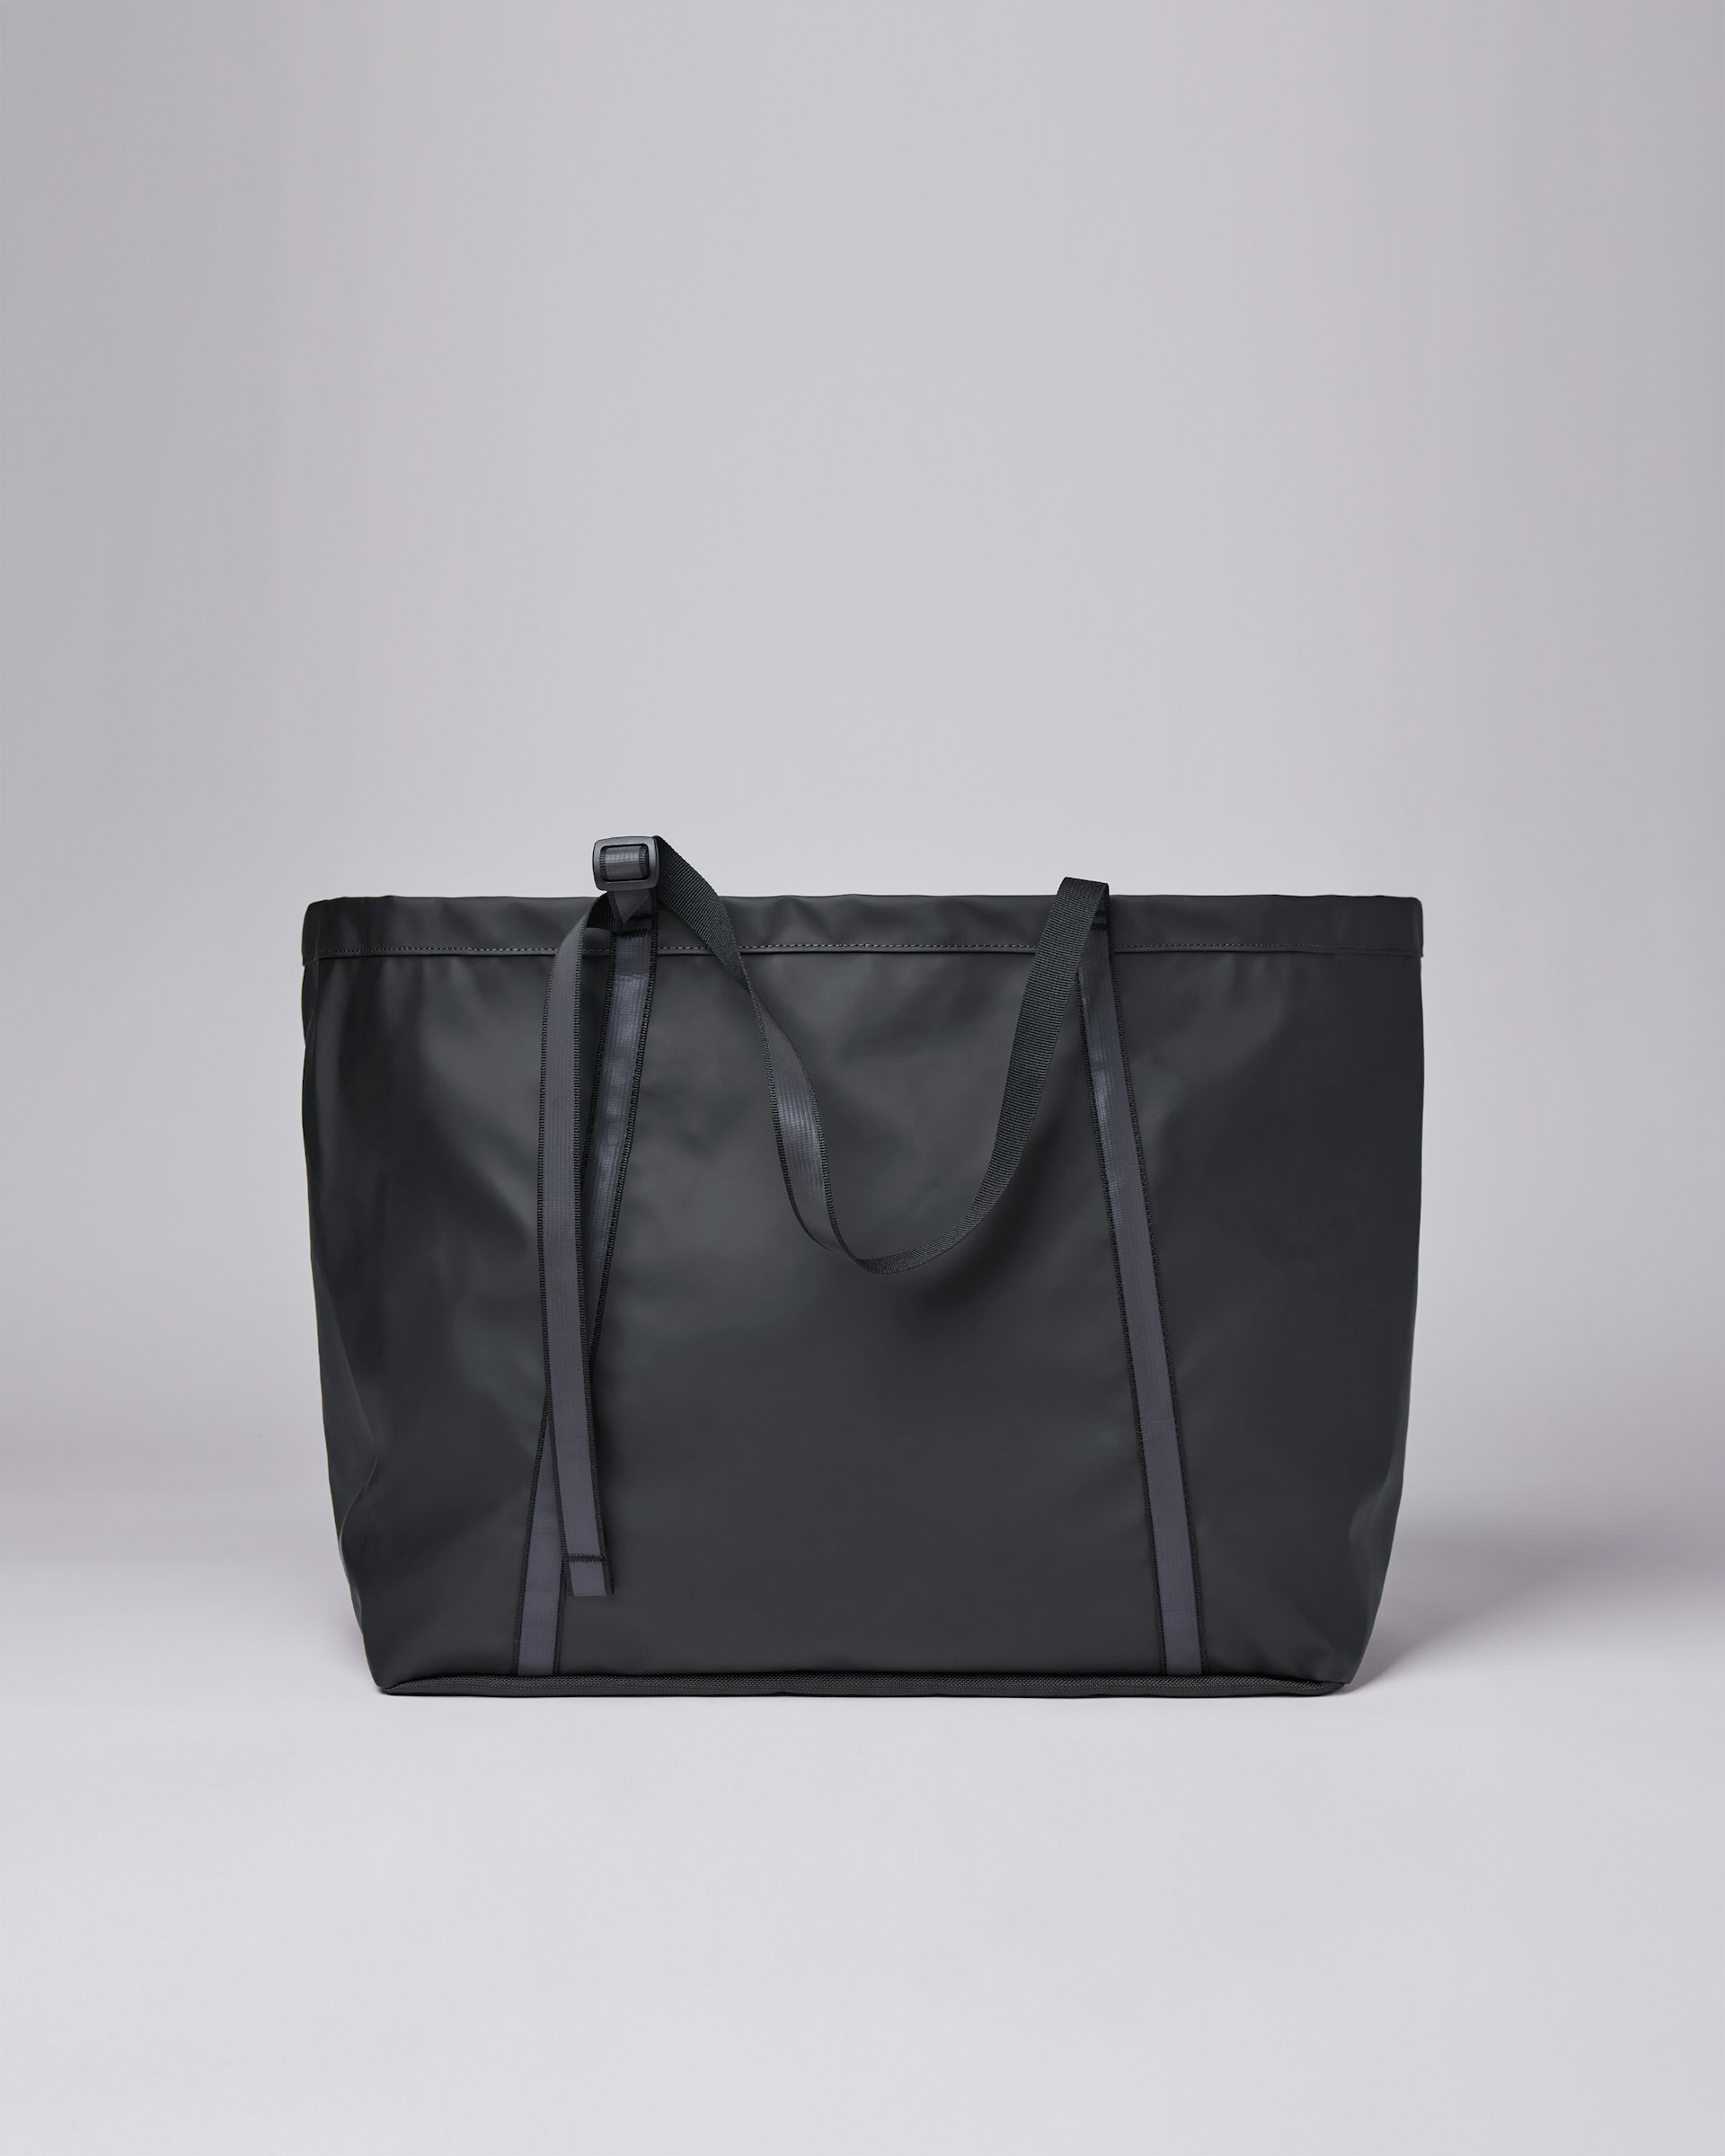 Albin belongs to the category Tote bags and is in color black (3 of 5)